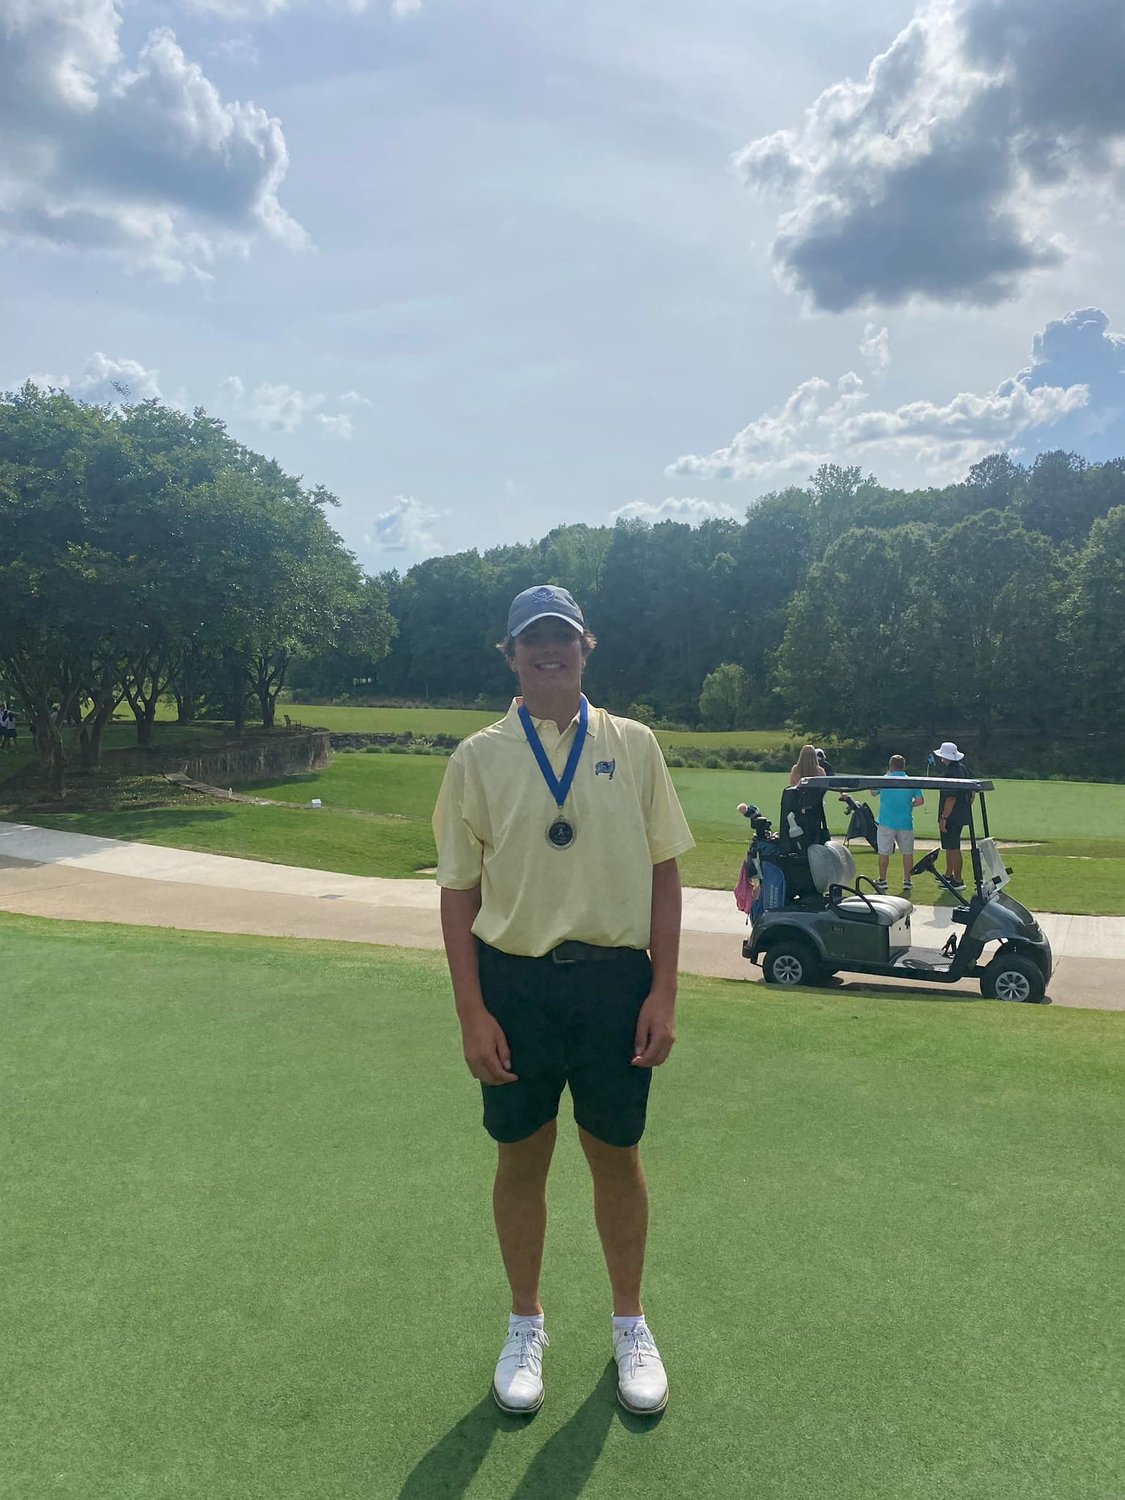 Trip Duke finished tied for third in the sub-state tournament this spring as a sophomore for the Pirates. Duke racked up 141.5 points over the last 12 months and was named to the Alabama Golf Association’s third-team all-state for his efforts.